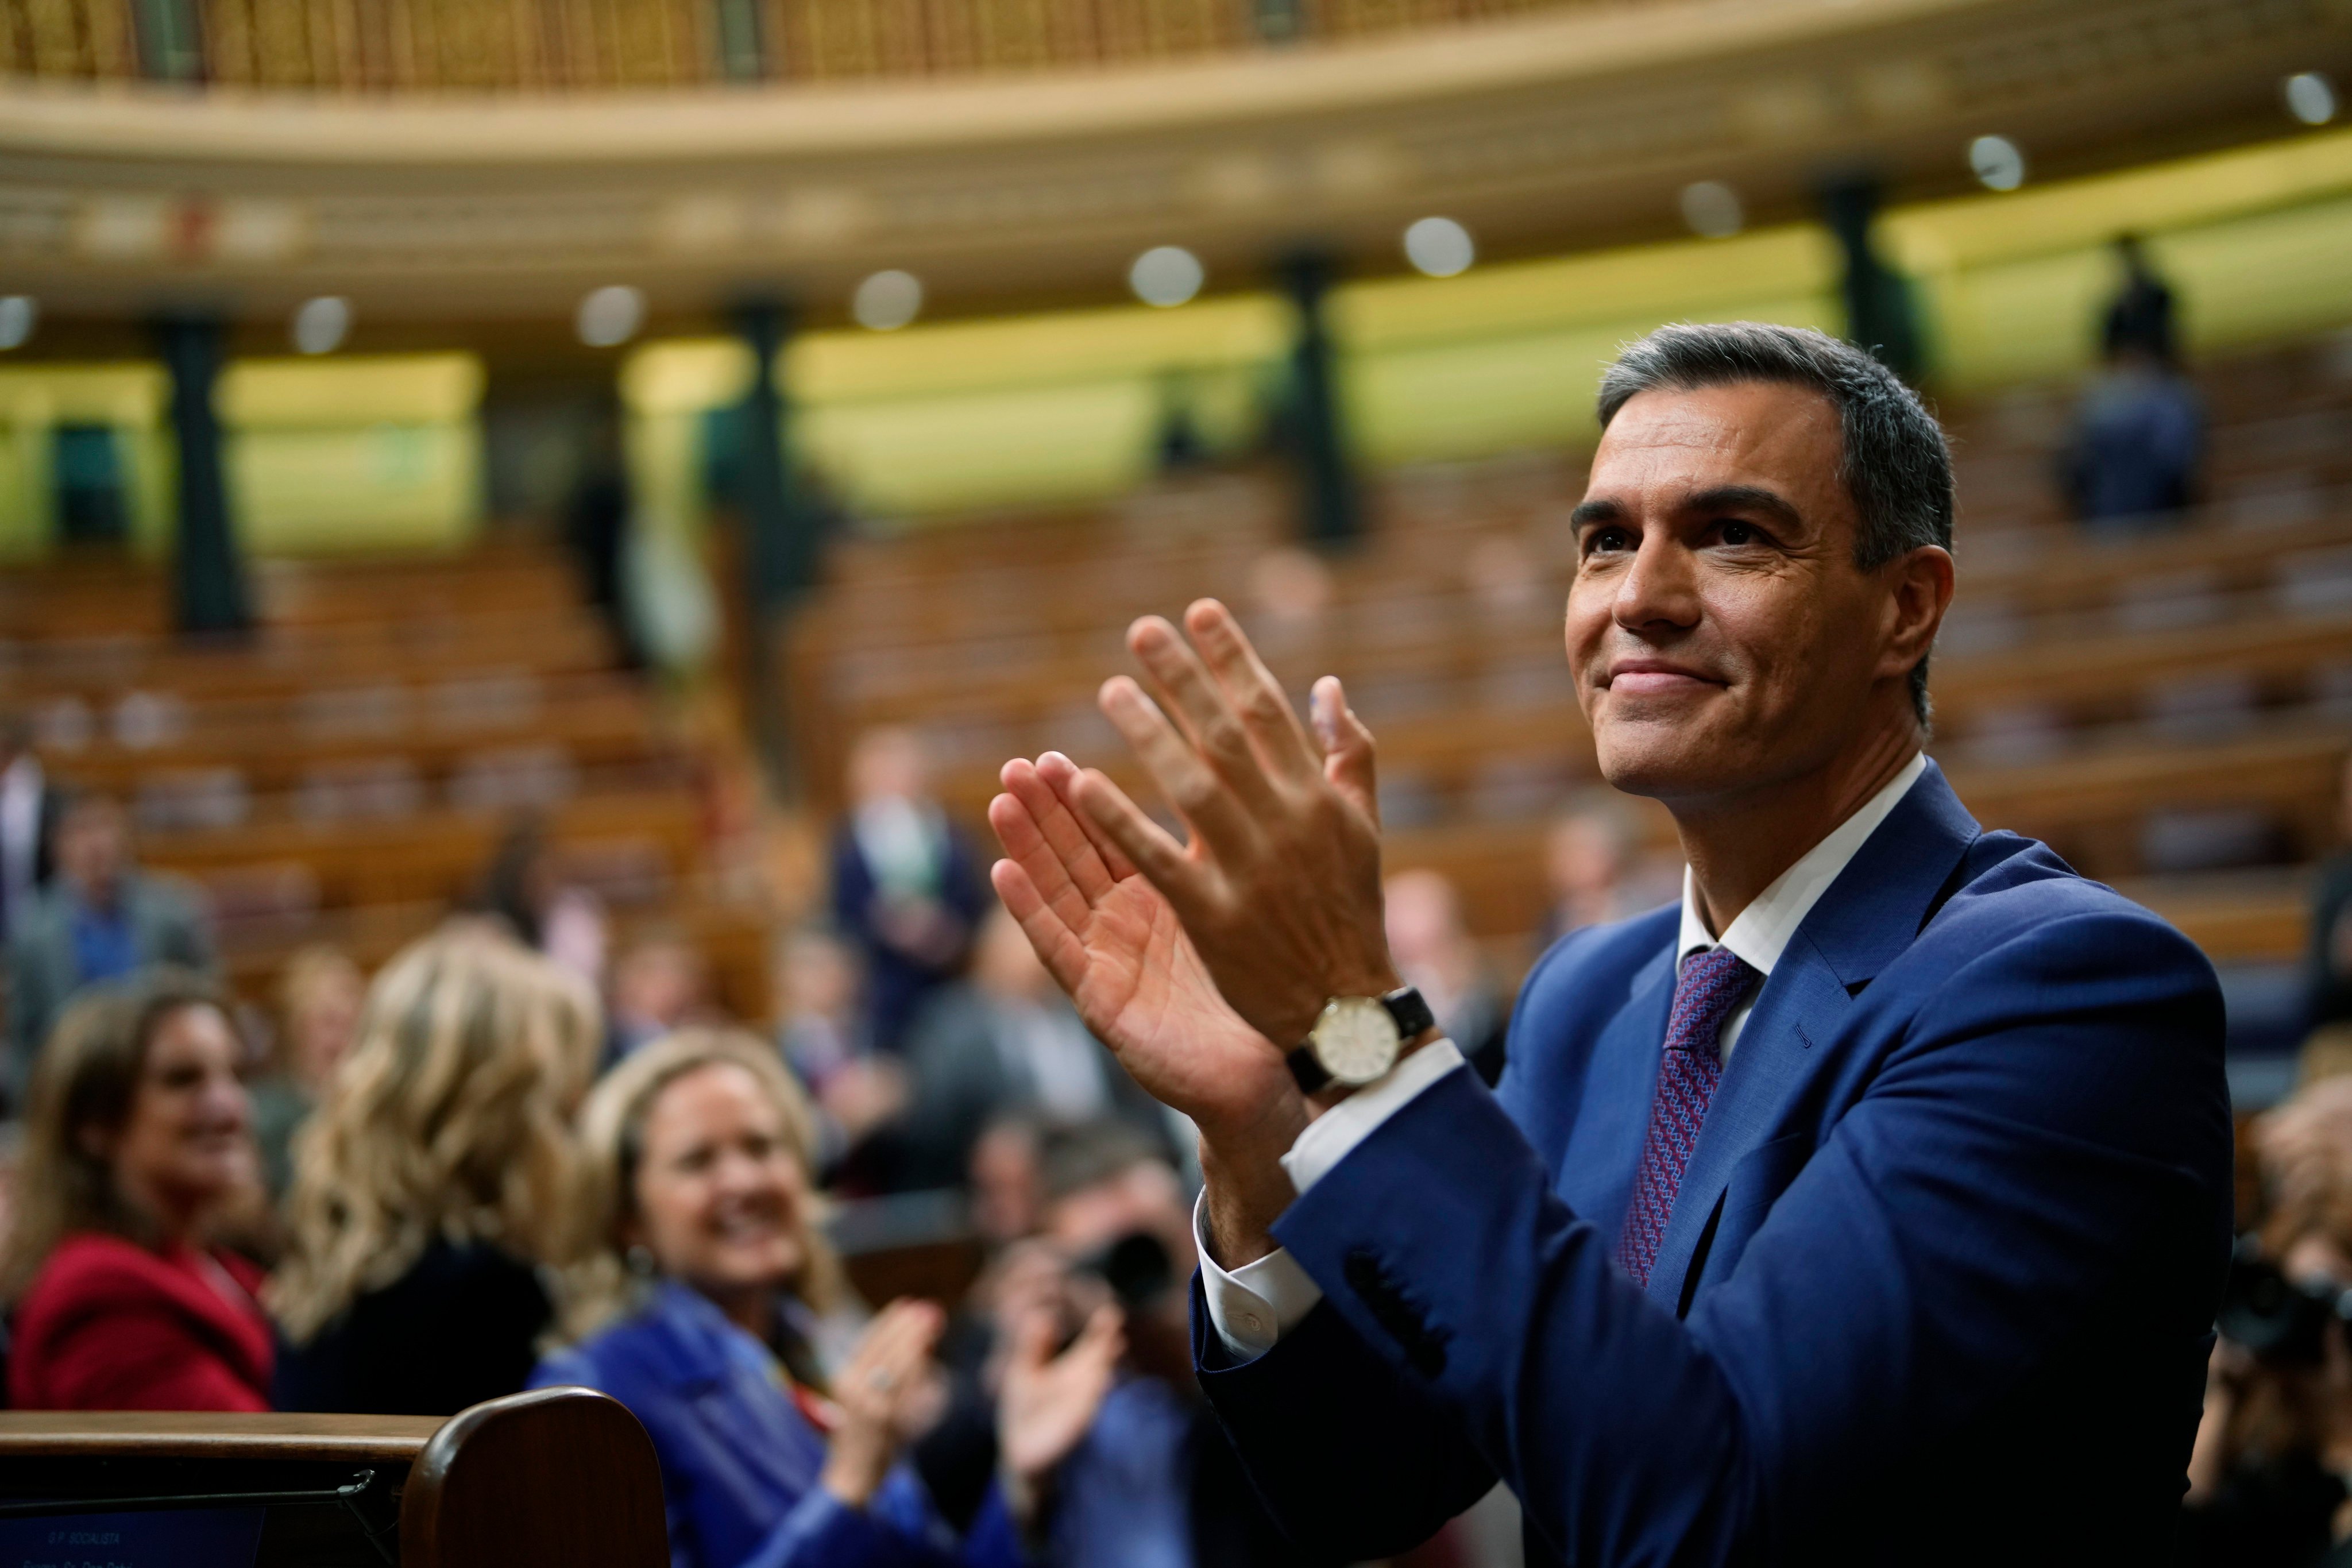 Spain’s Prime Minister Pedro Sanchez says he will continue in office “even with more strength” after days of reflection. Photo: AP